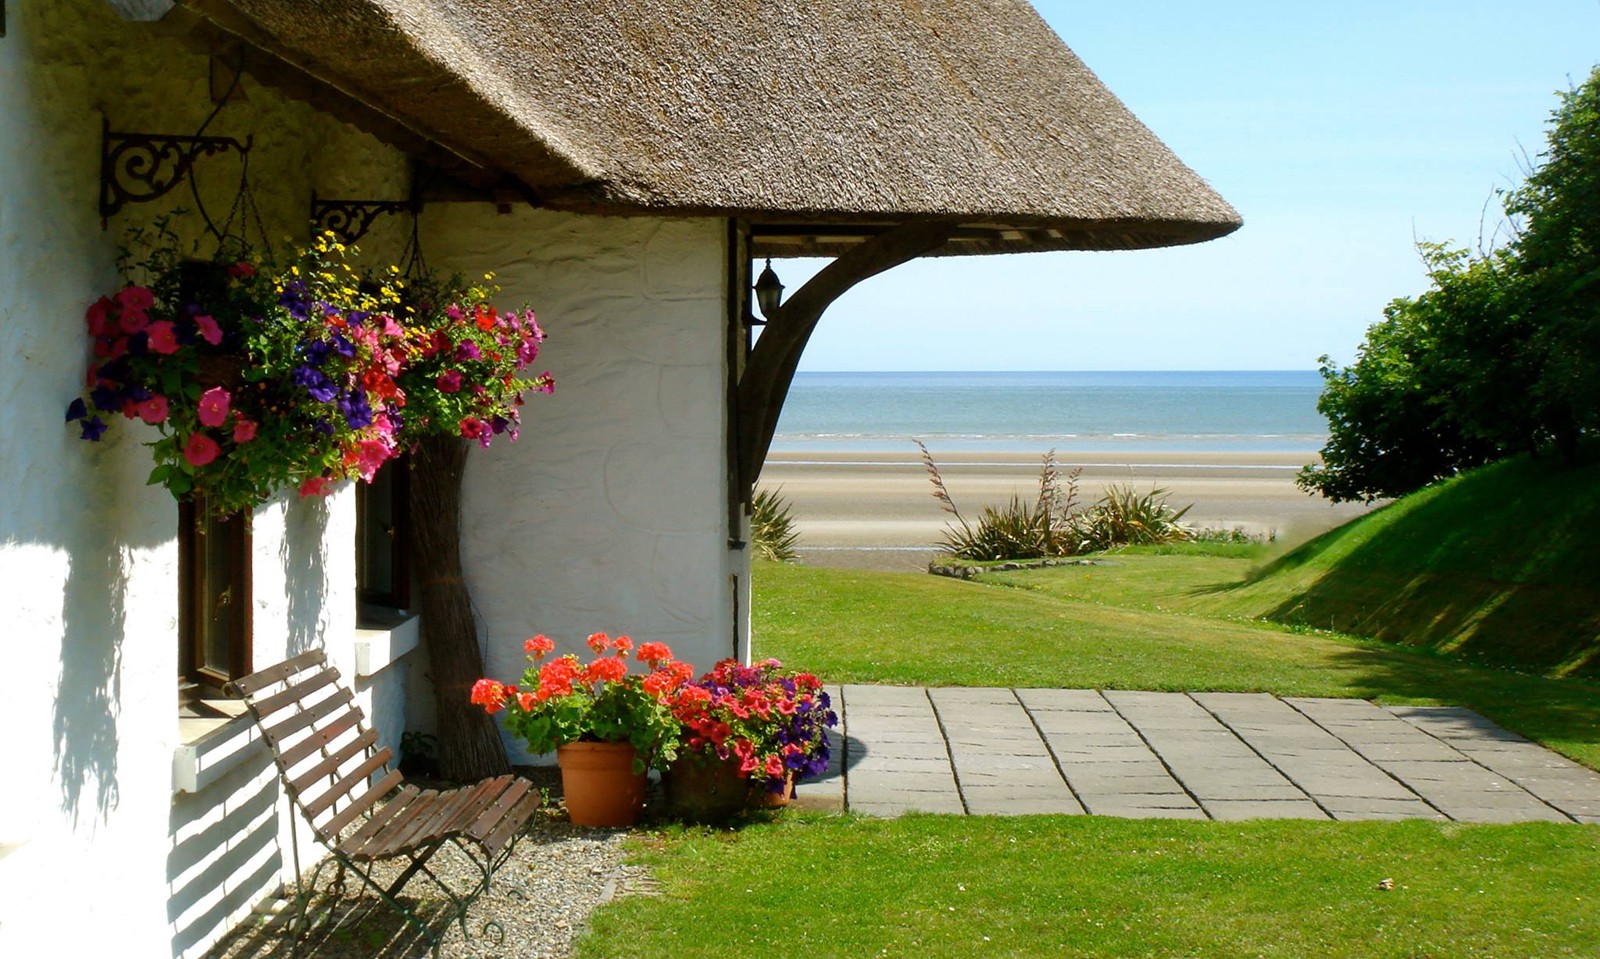 5-Star Cottages, Bettystown, Co. Meath